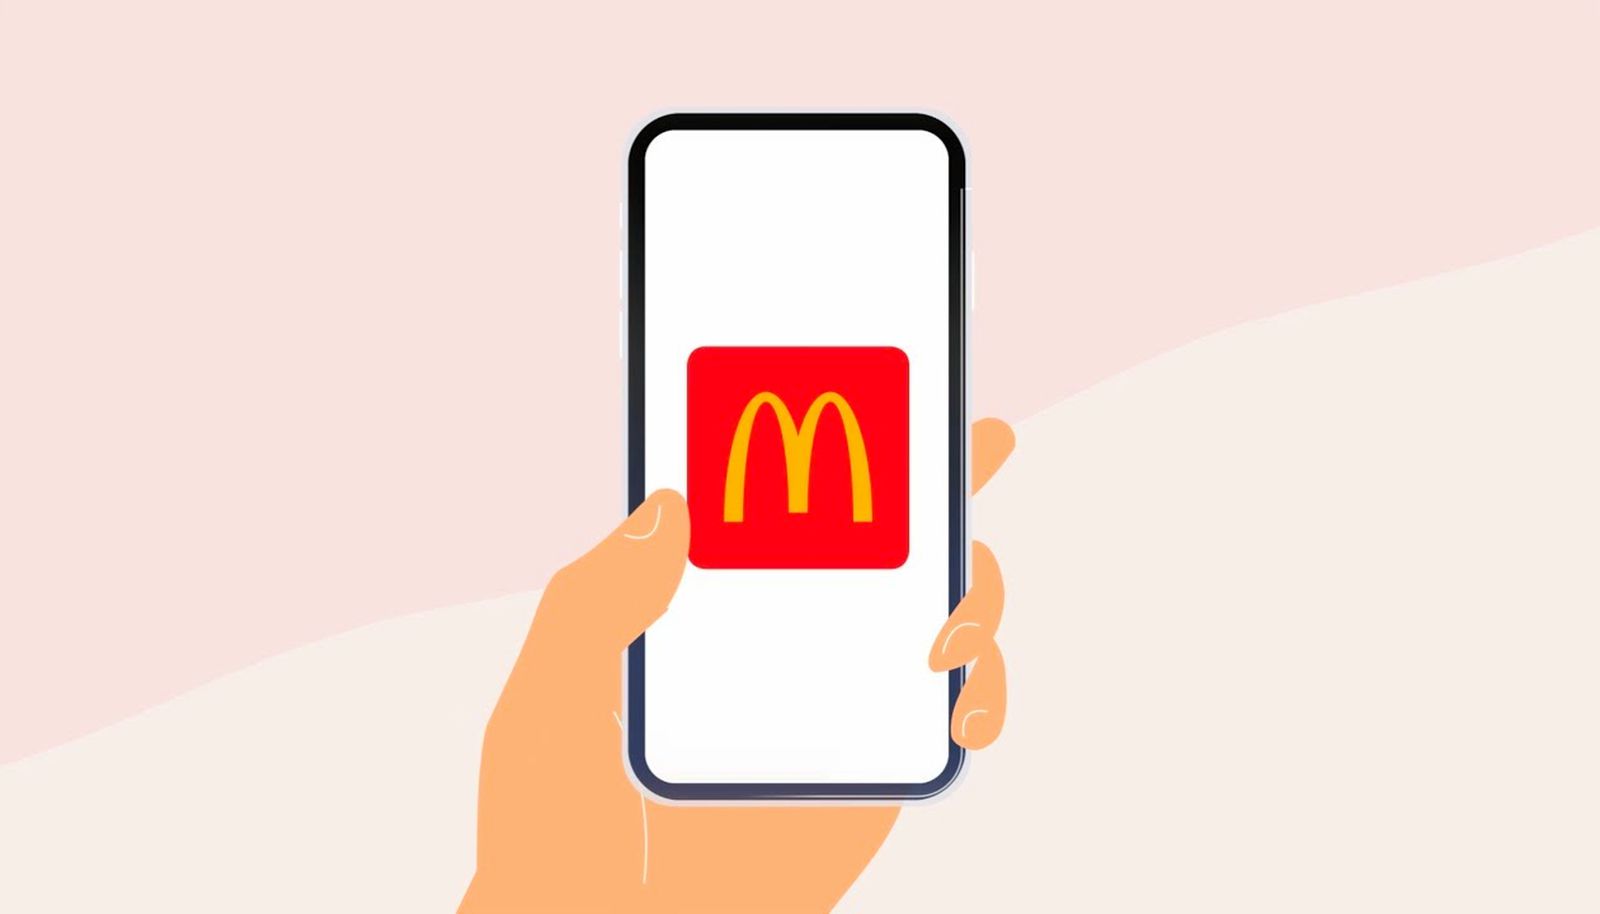 Apple Pay Promo Offers Free McNuggets With Minimum $1 Purchase - macrumors.com